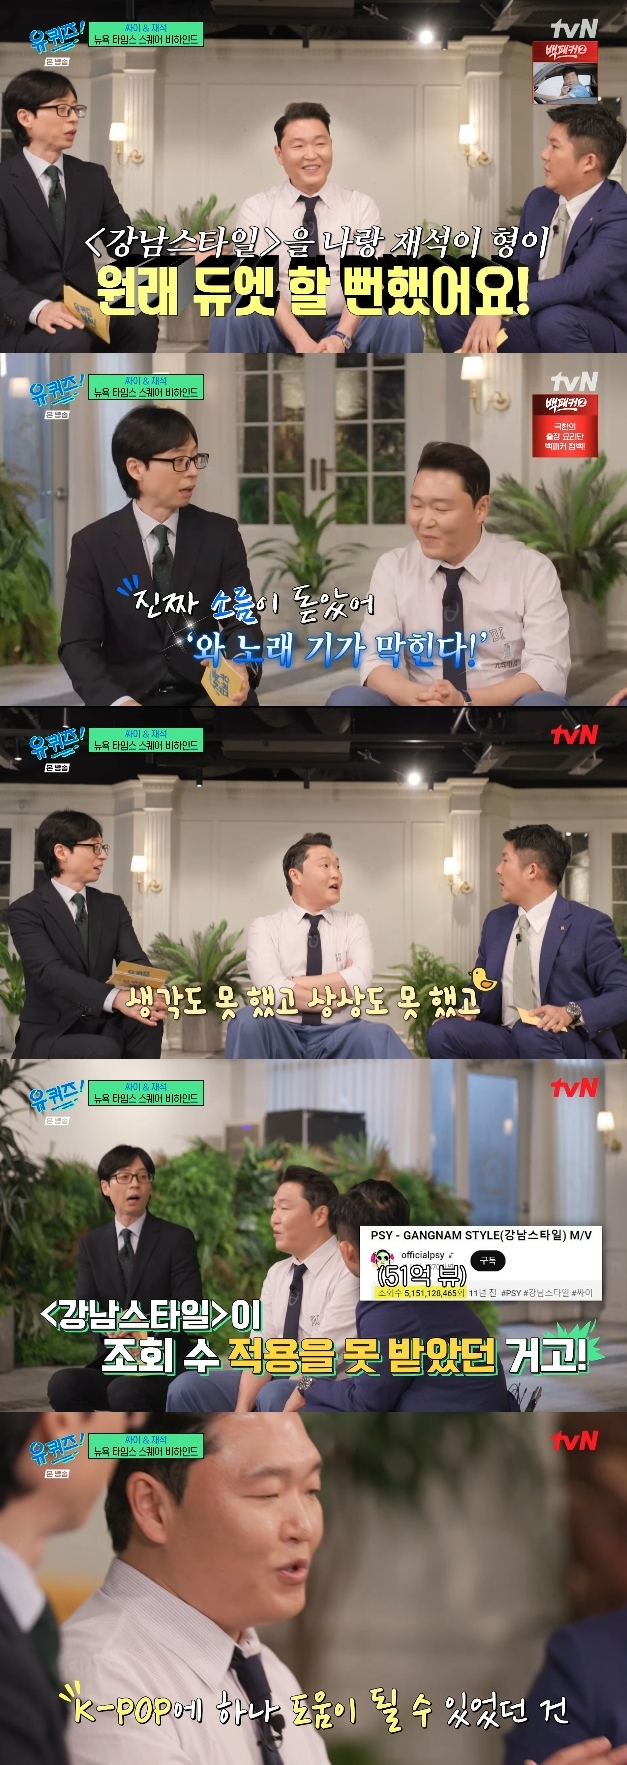 On the 22nd episode of the tvN variety program "You Quiz on the Block" (hereinafter referred to as "You Quiz"), PSY, who was invited for the 'Festival' special, shared behind-the-scenes stories related to his hit song "Gangnam Style" and showcased his eloquence